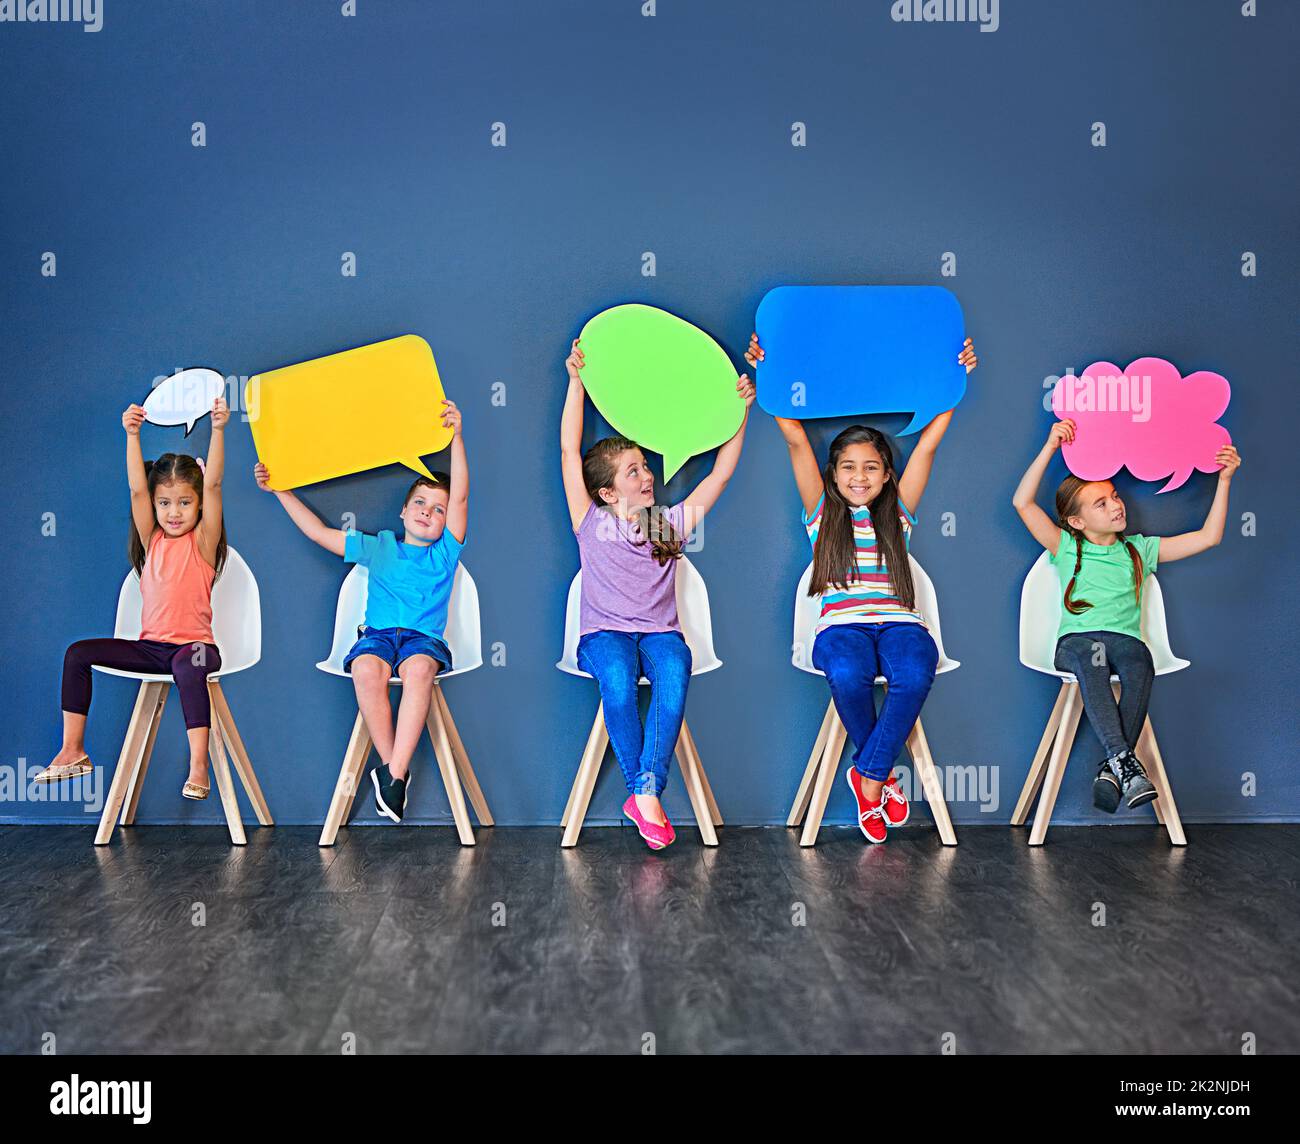 Fill the world with your voice. Studio shot of a diverse group of kids sitting on chairs and holding up speech bubbles against a blue background. Stock Photo